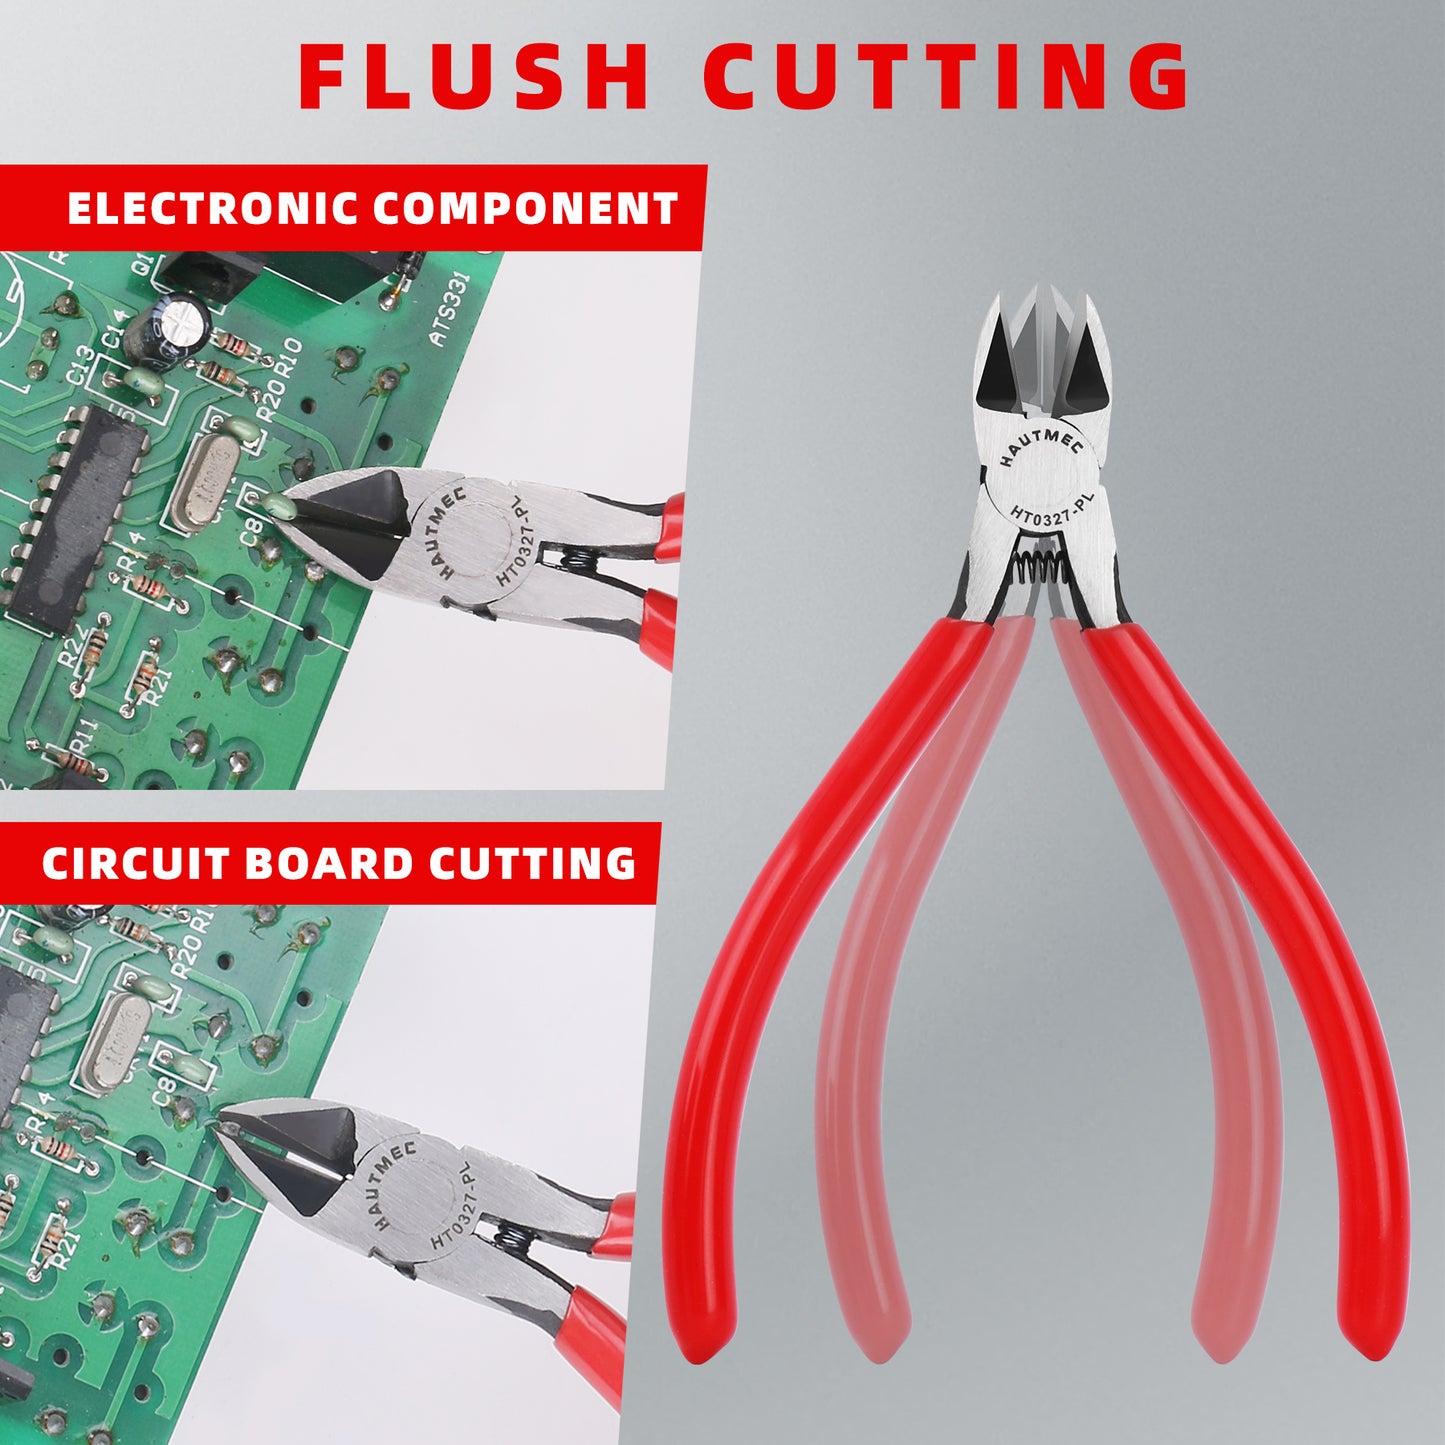 HAUTMEC 5" Precise Small Flush Cutting of Engineer Wire Cutter Plier with Location Pin for Fine Shearing, Perfect for Circuit Board Cutting, Electronic Components, HT0327